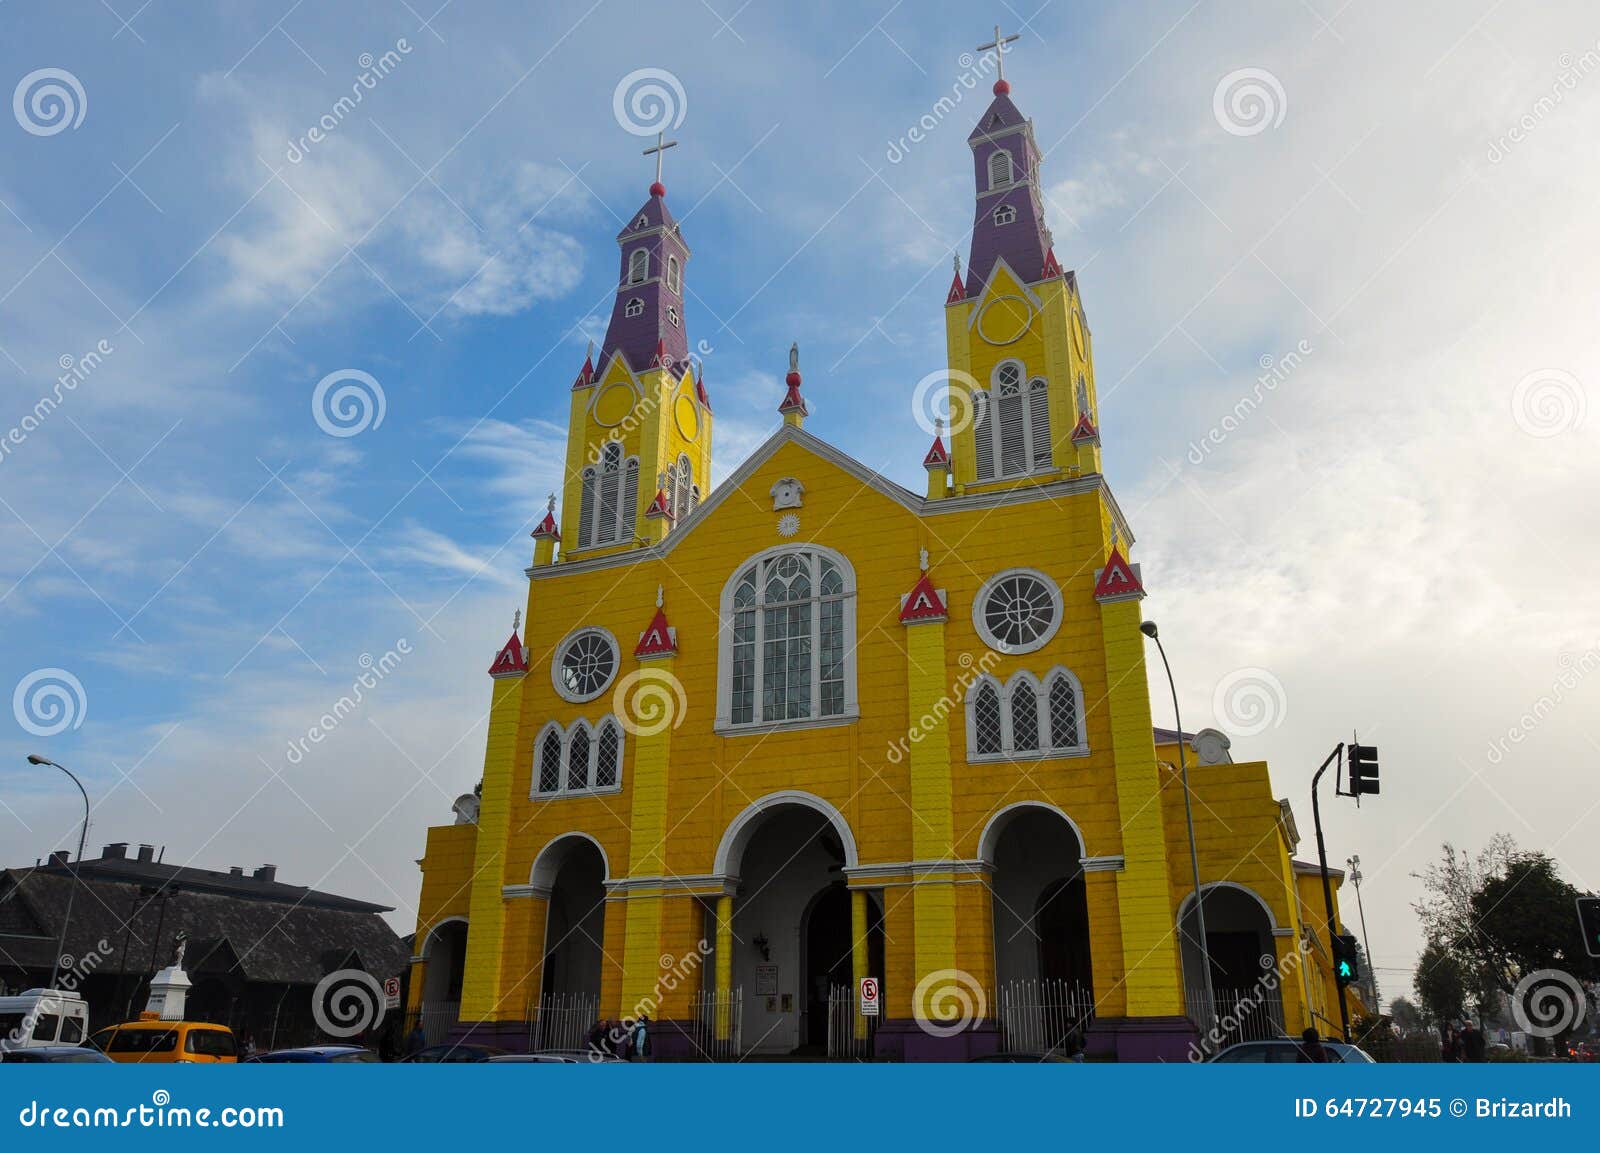 gorgeous colored and wooden churches, chiloe island, chile